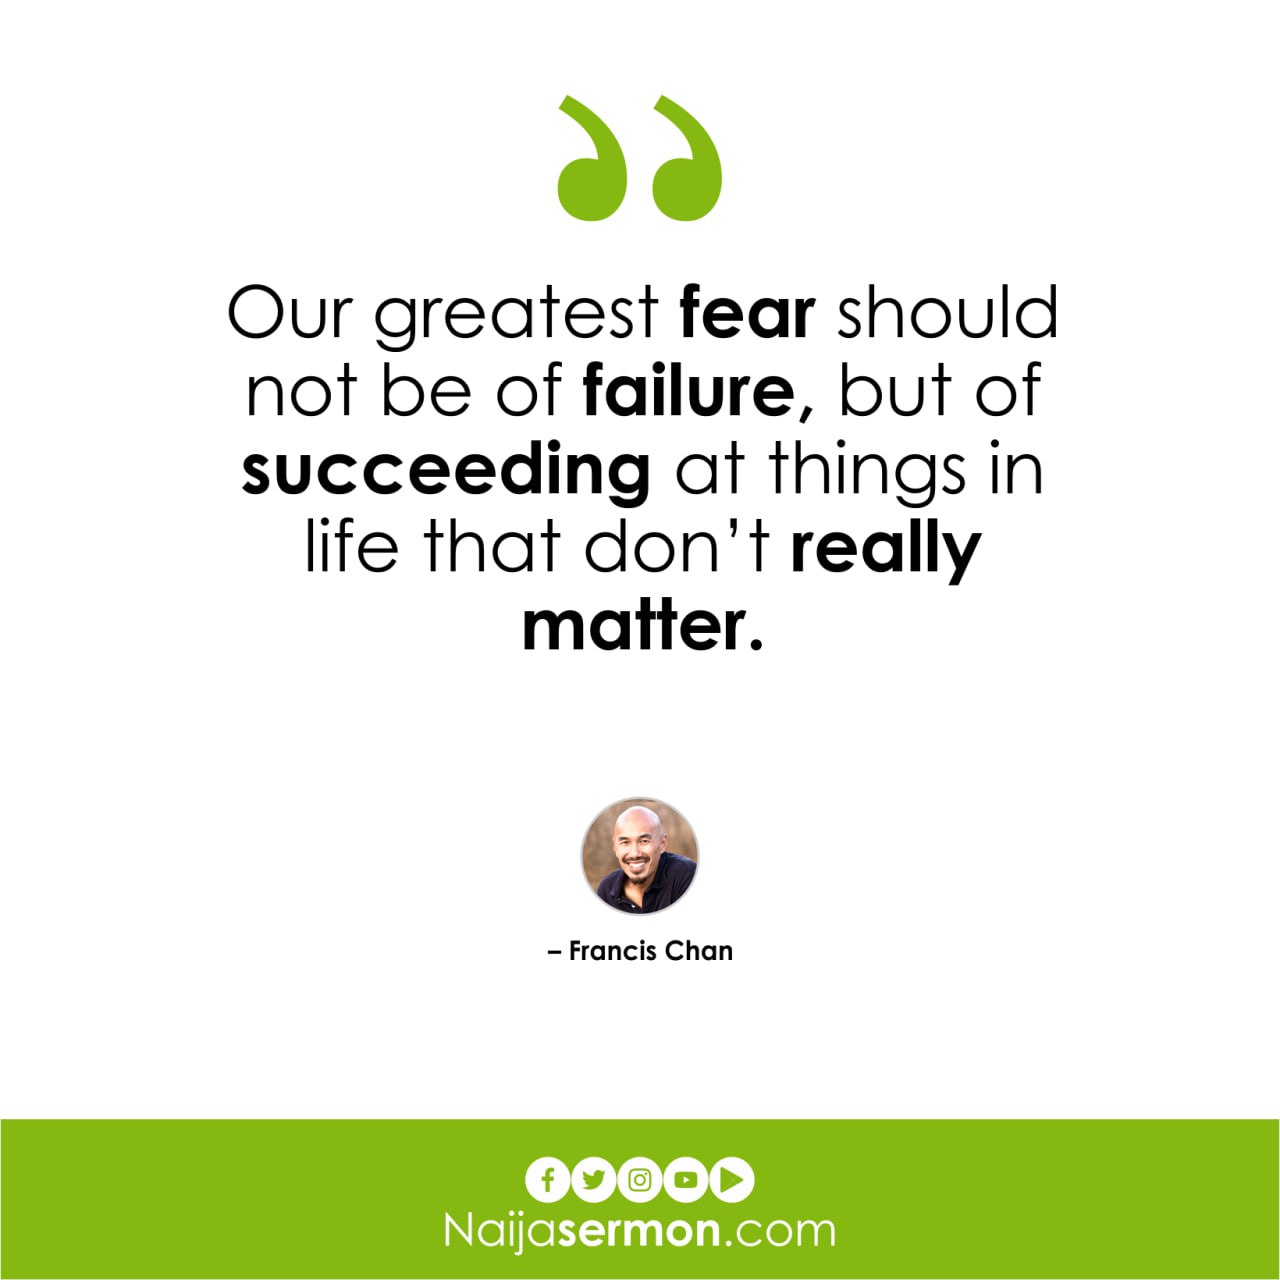 QUOTE OF THE DAY BY FRANCIS CHAN 8